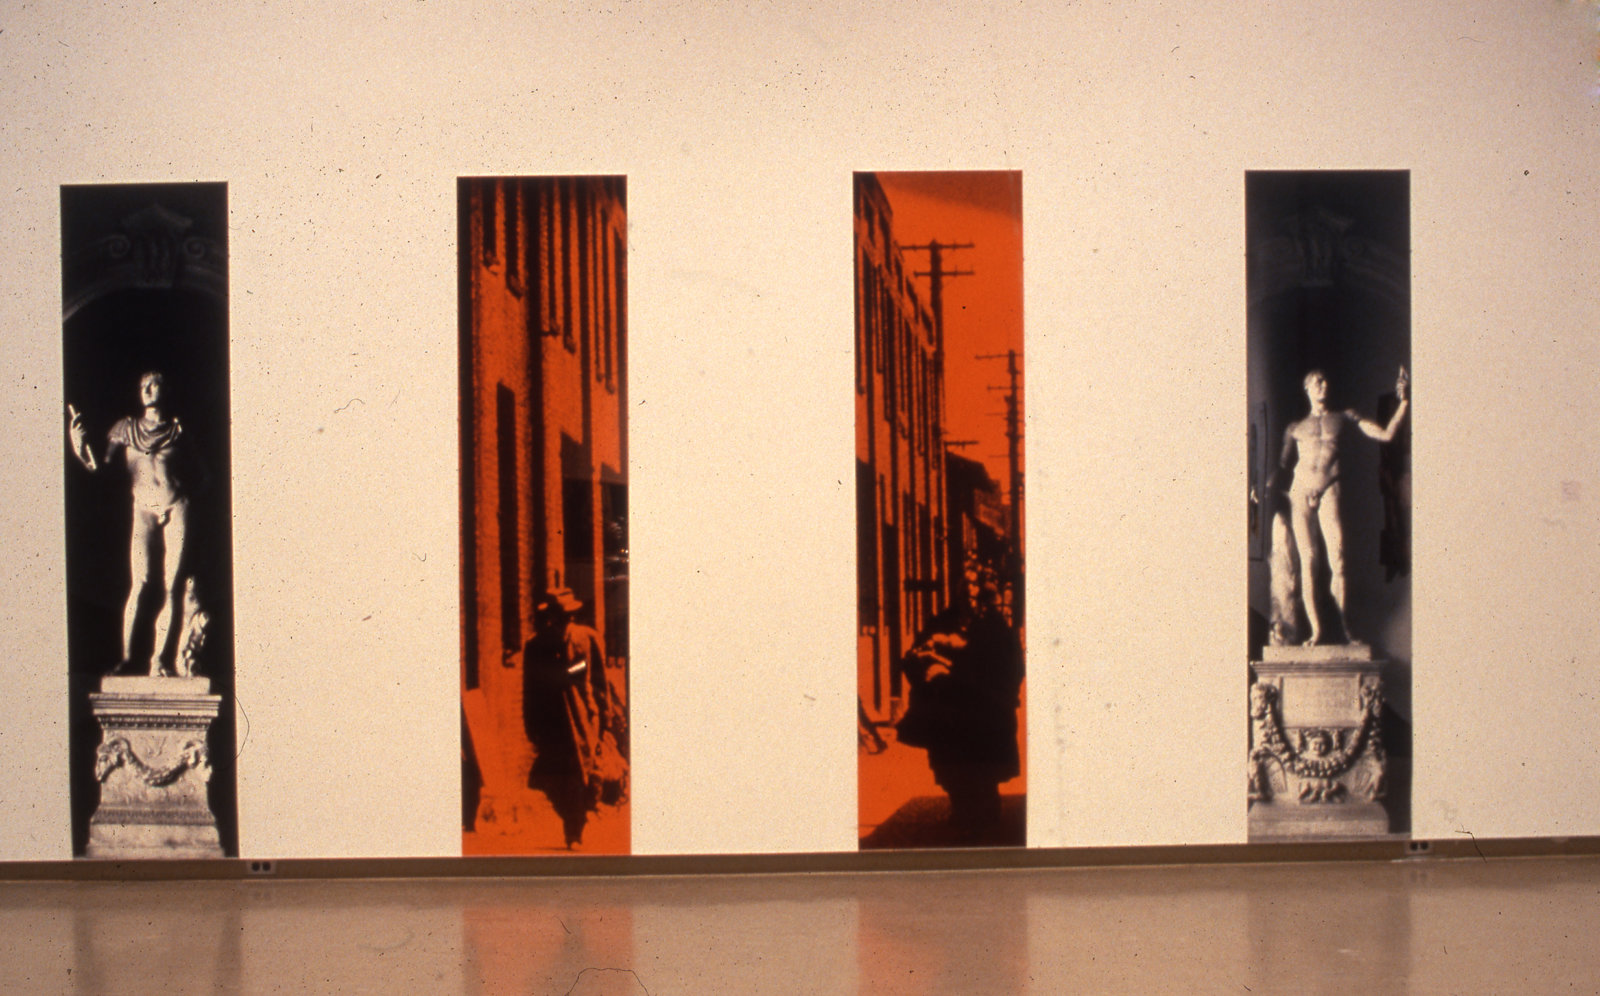 Ian Wallace, The Imperial City, 1986, black and white photomurals with plexiglas, 4 panels, each 116 x 24 in. (293 x 61 cm)